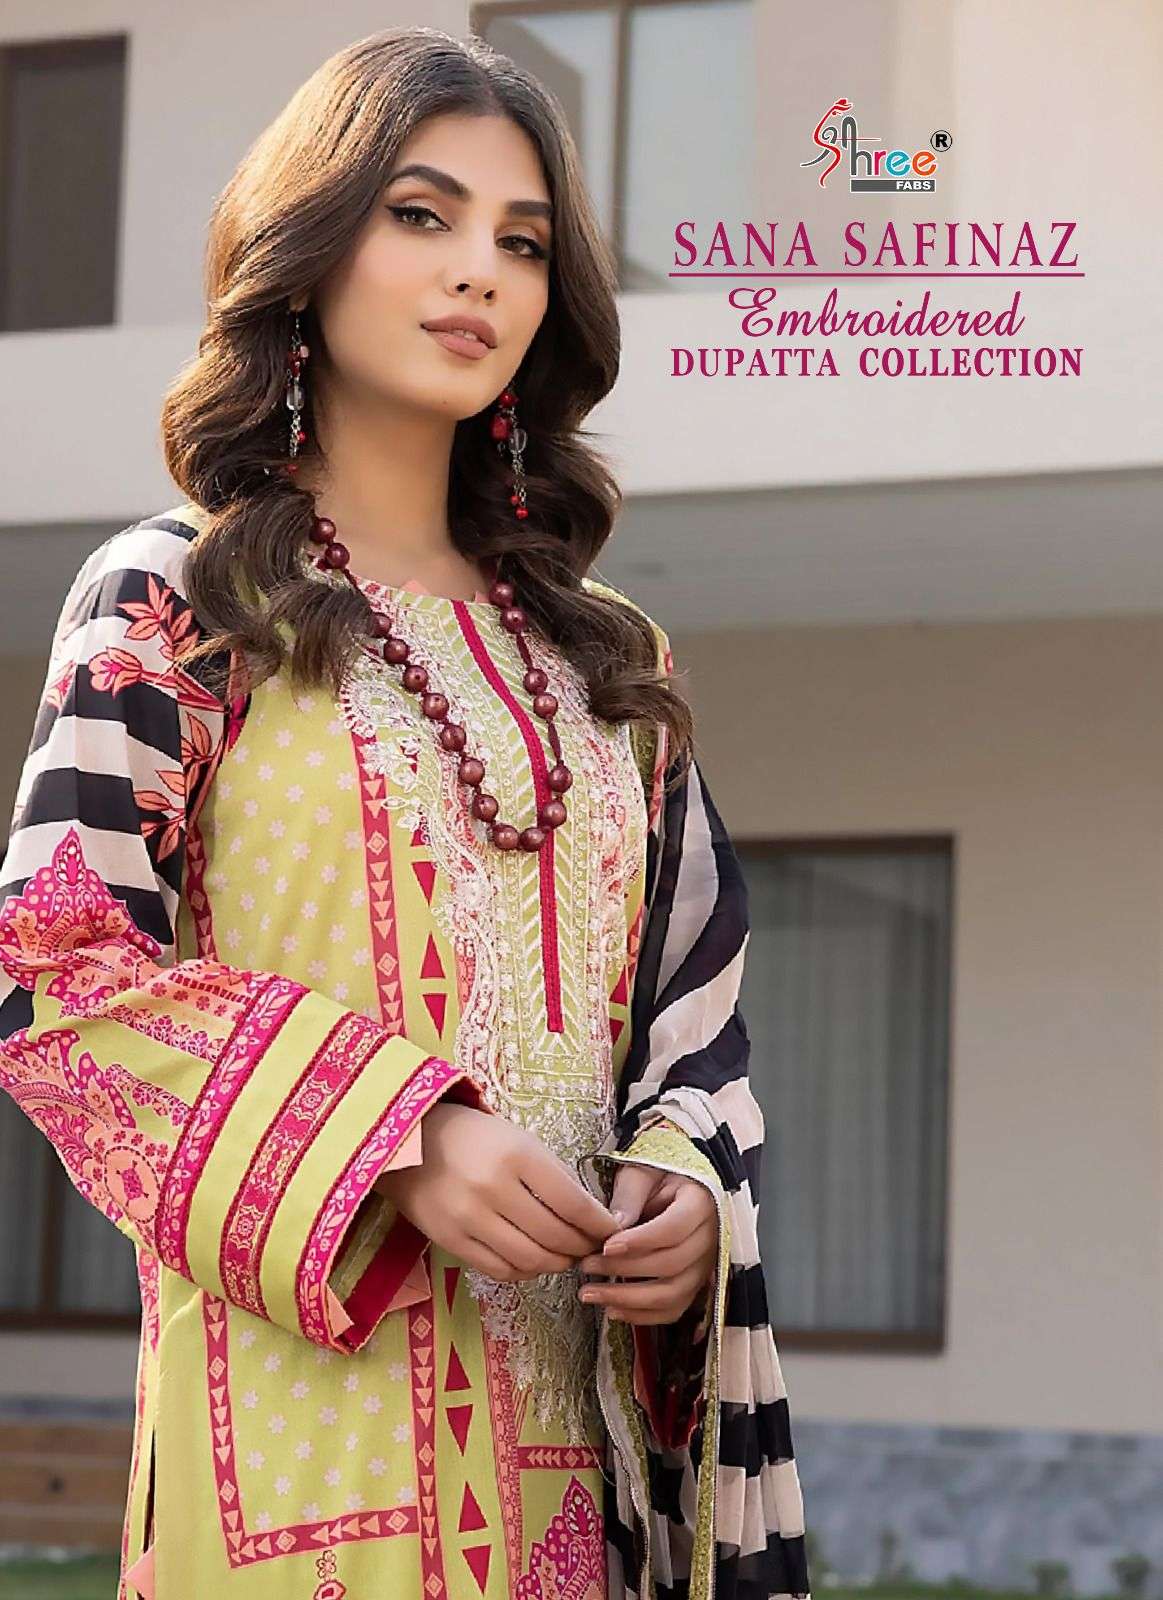 SHREE FAB SANA SAFINAZ EMBROIDERED DUPATTA COLLECTION VOL 1 DESIGNER COTTON ORINT WITH SELF EMBROIDERY WORK PAKISTANI REPLICA SUITS BEST WHOLESALE RATE